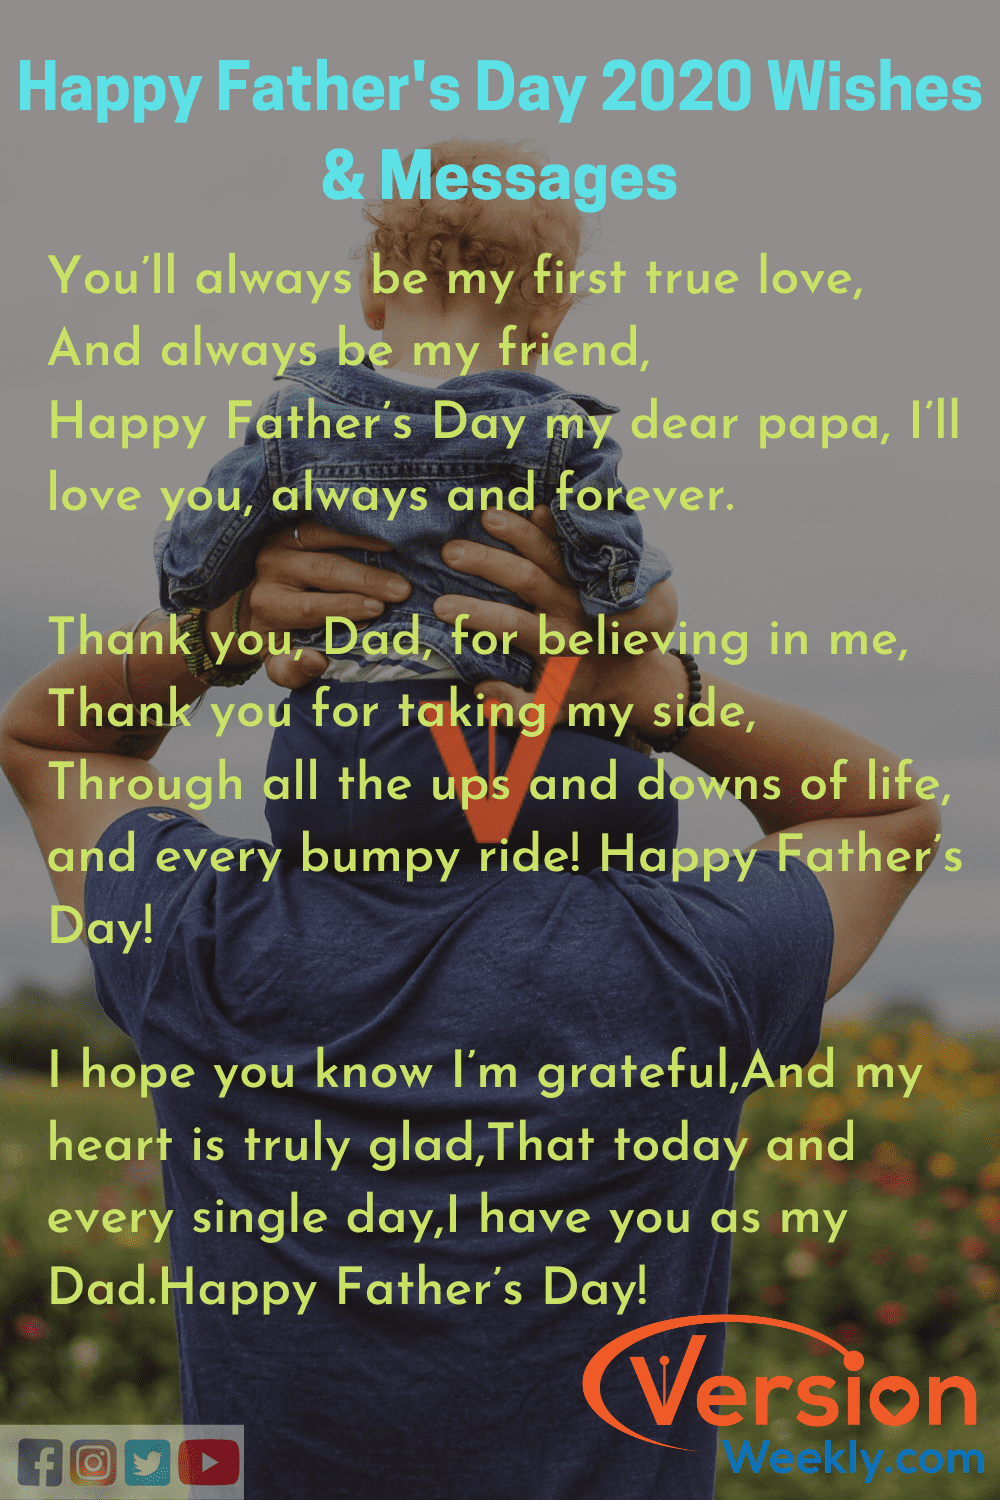 Happy fathers day wishes & messages 